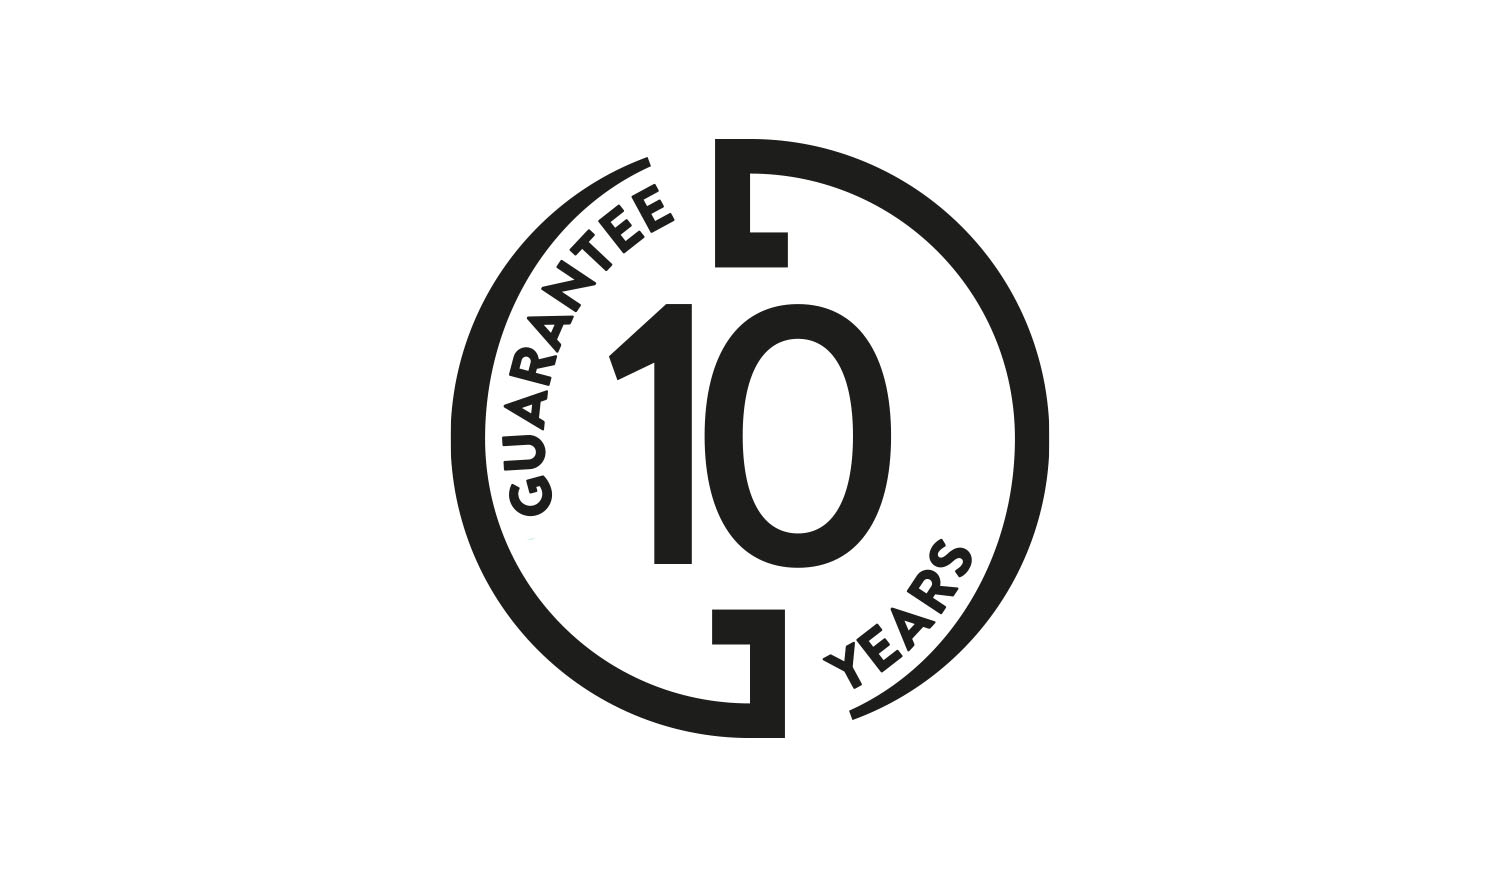 System guarantees for 10 years